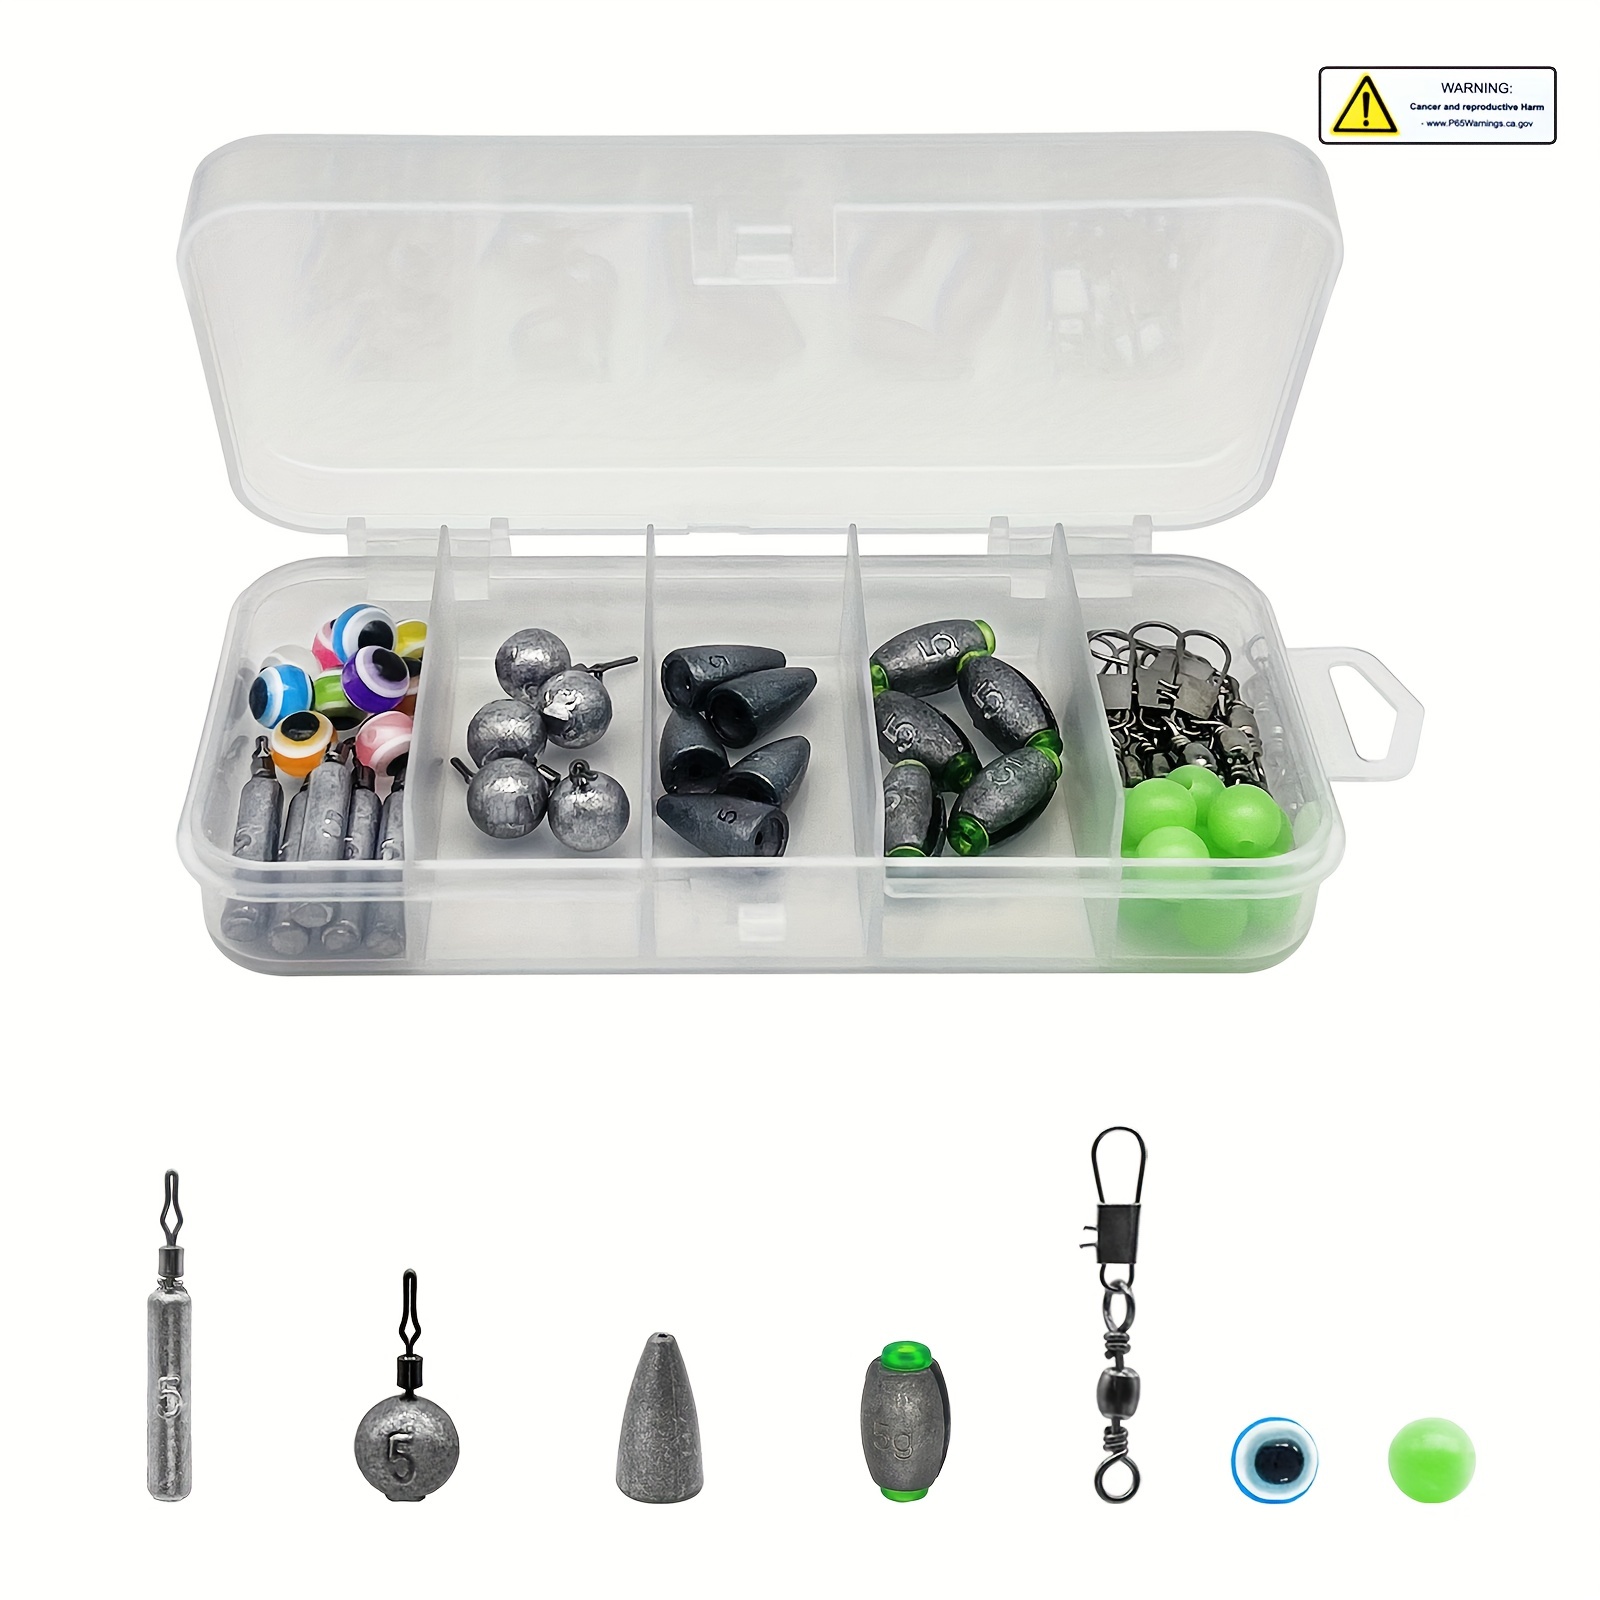 Complete Fishing Tackle Kit With Sinkers, Beads, Swivels, And Rigs -  Perfect For Carolina And Texas Rigs - Enhance Your Fishing Experience, Check Out Today's Deals Now